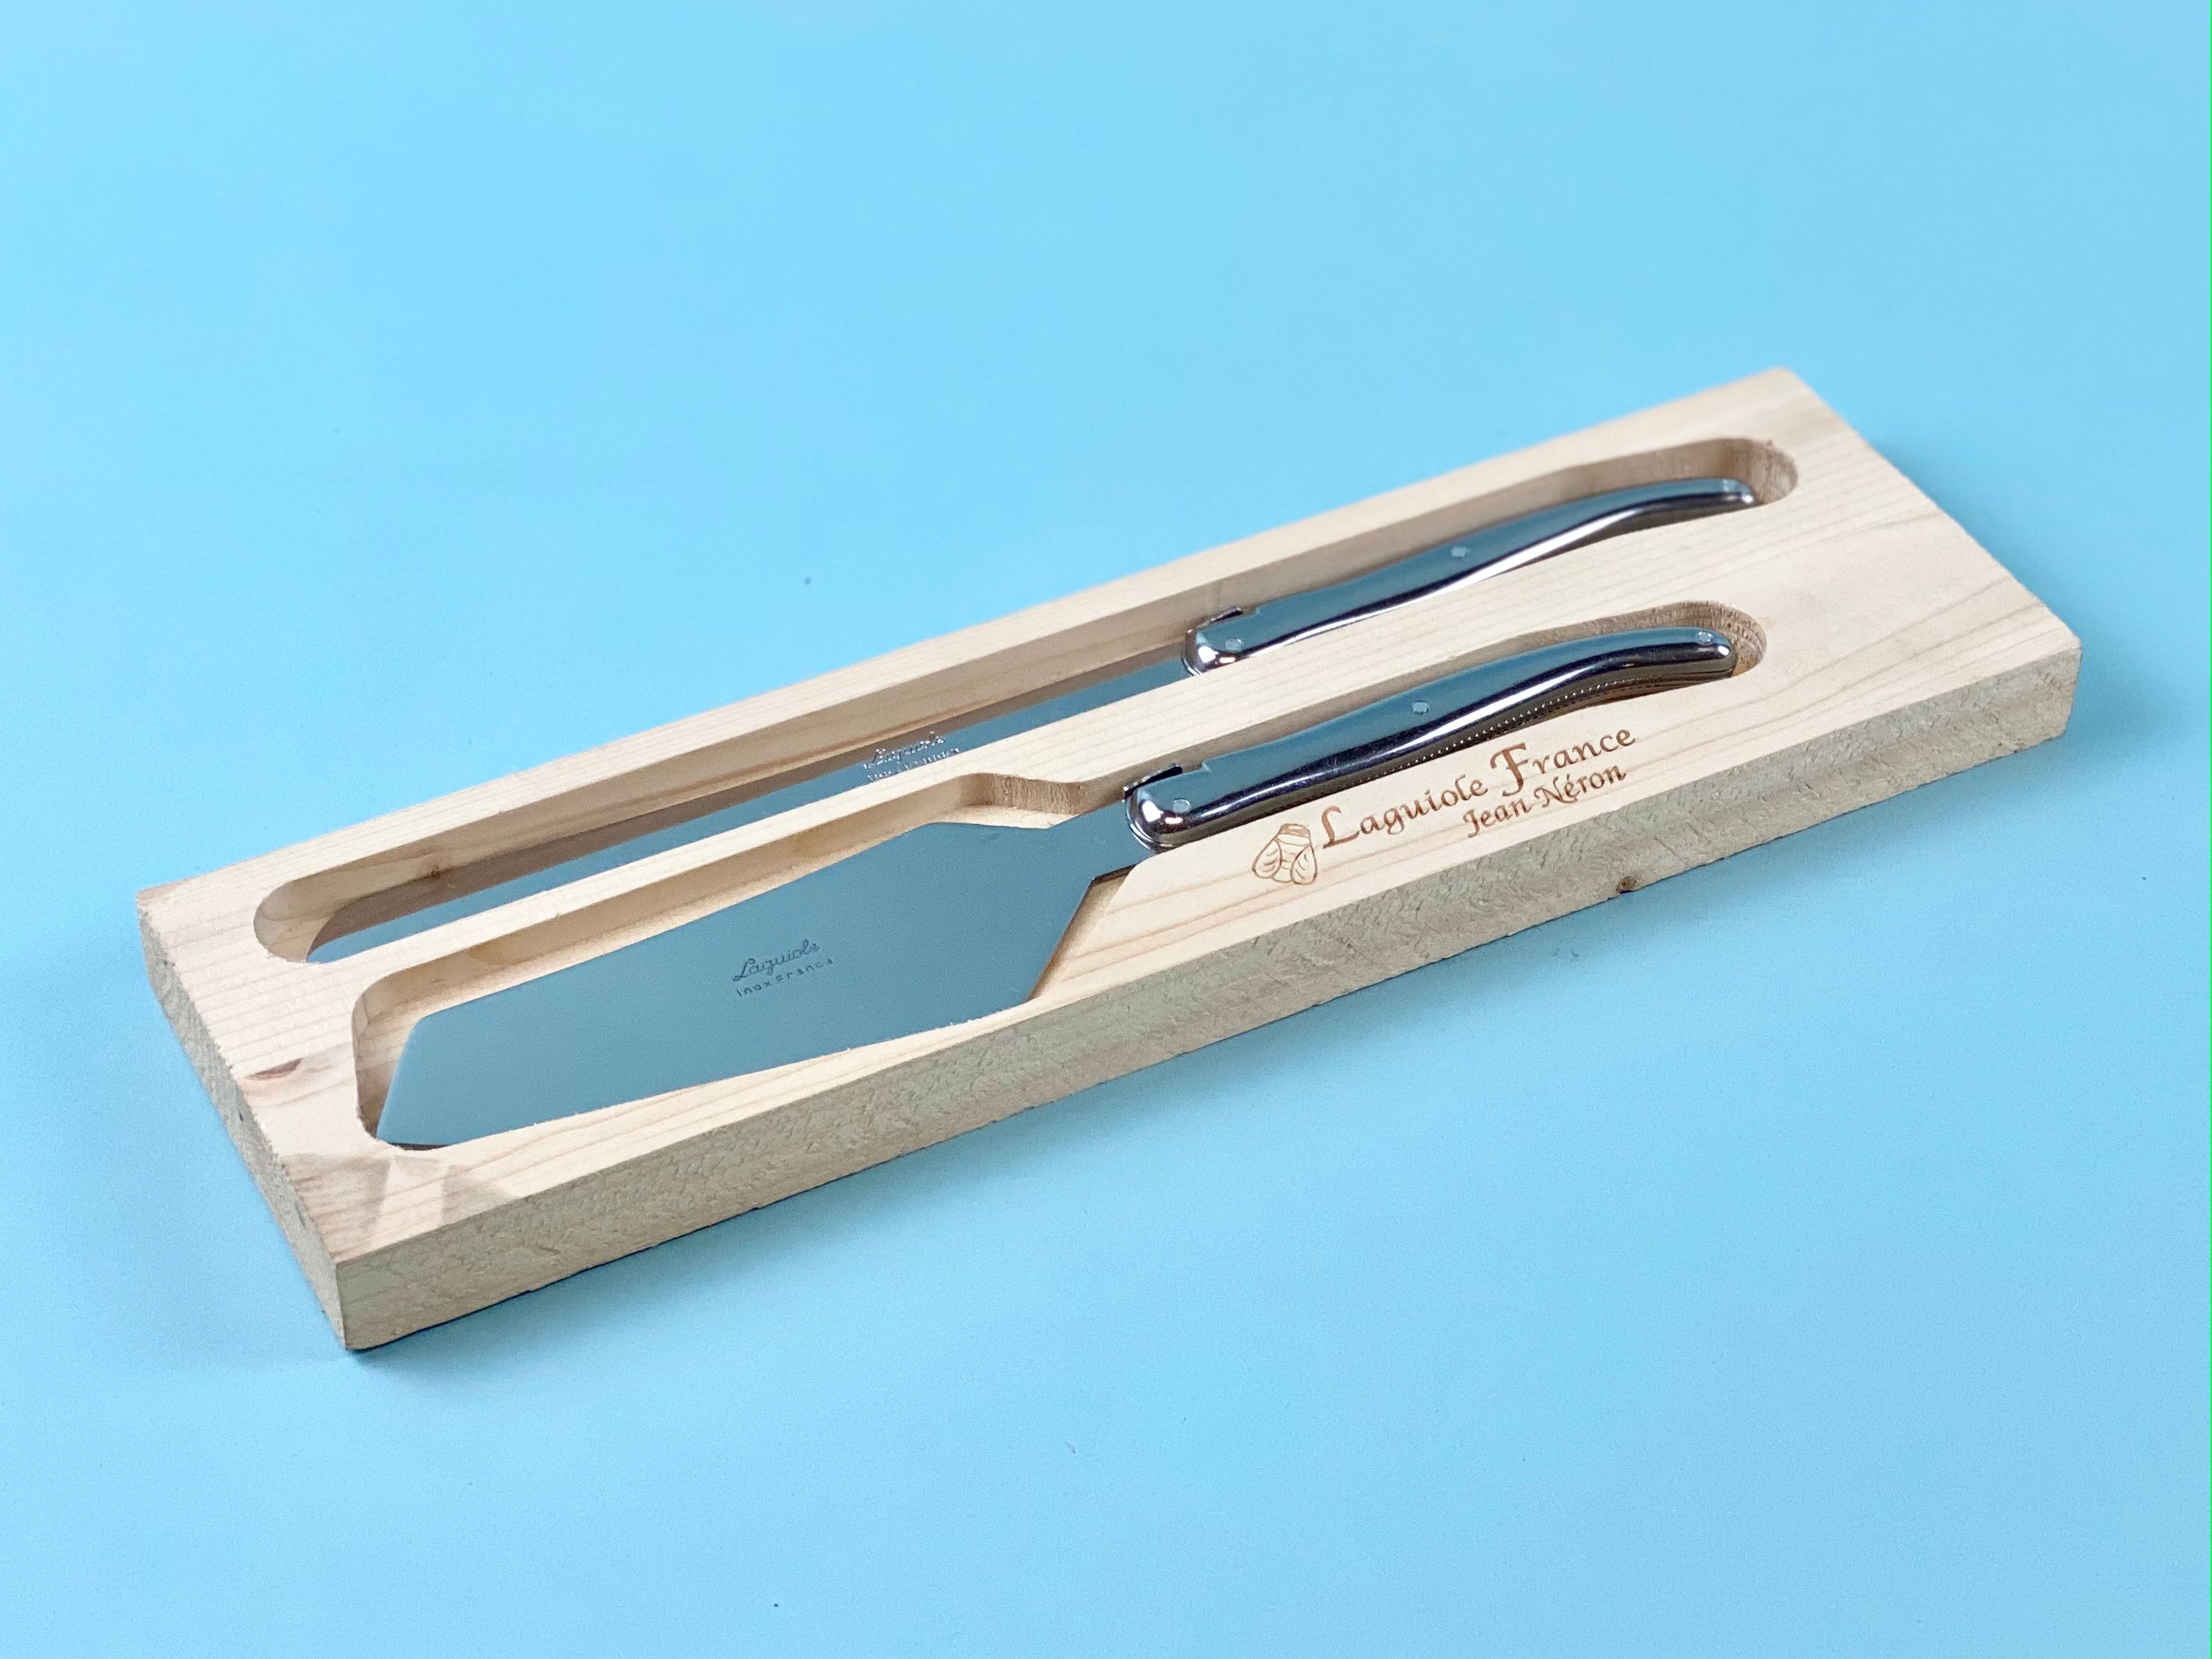 Laguiole Platine Cake & Bread Set All Stainless Wooden Box Cutlery Set Laguiole Brand_Laguiole Cheese Sets Kitchen_Dinnerware Laguiole Loose Mini Rainbow Utensils NR790123629PSS